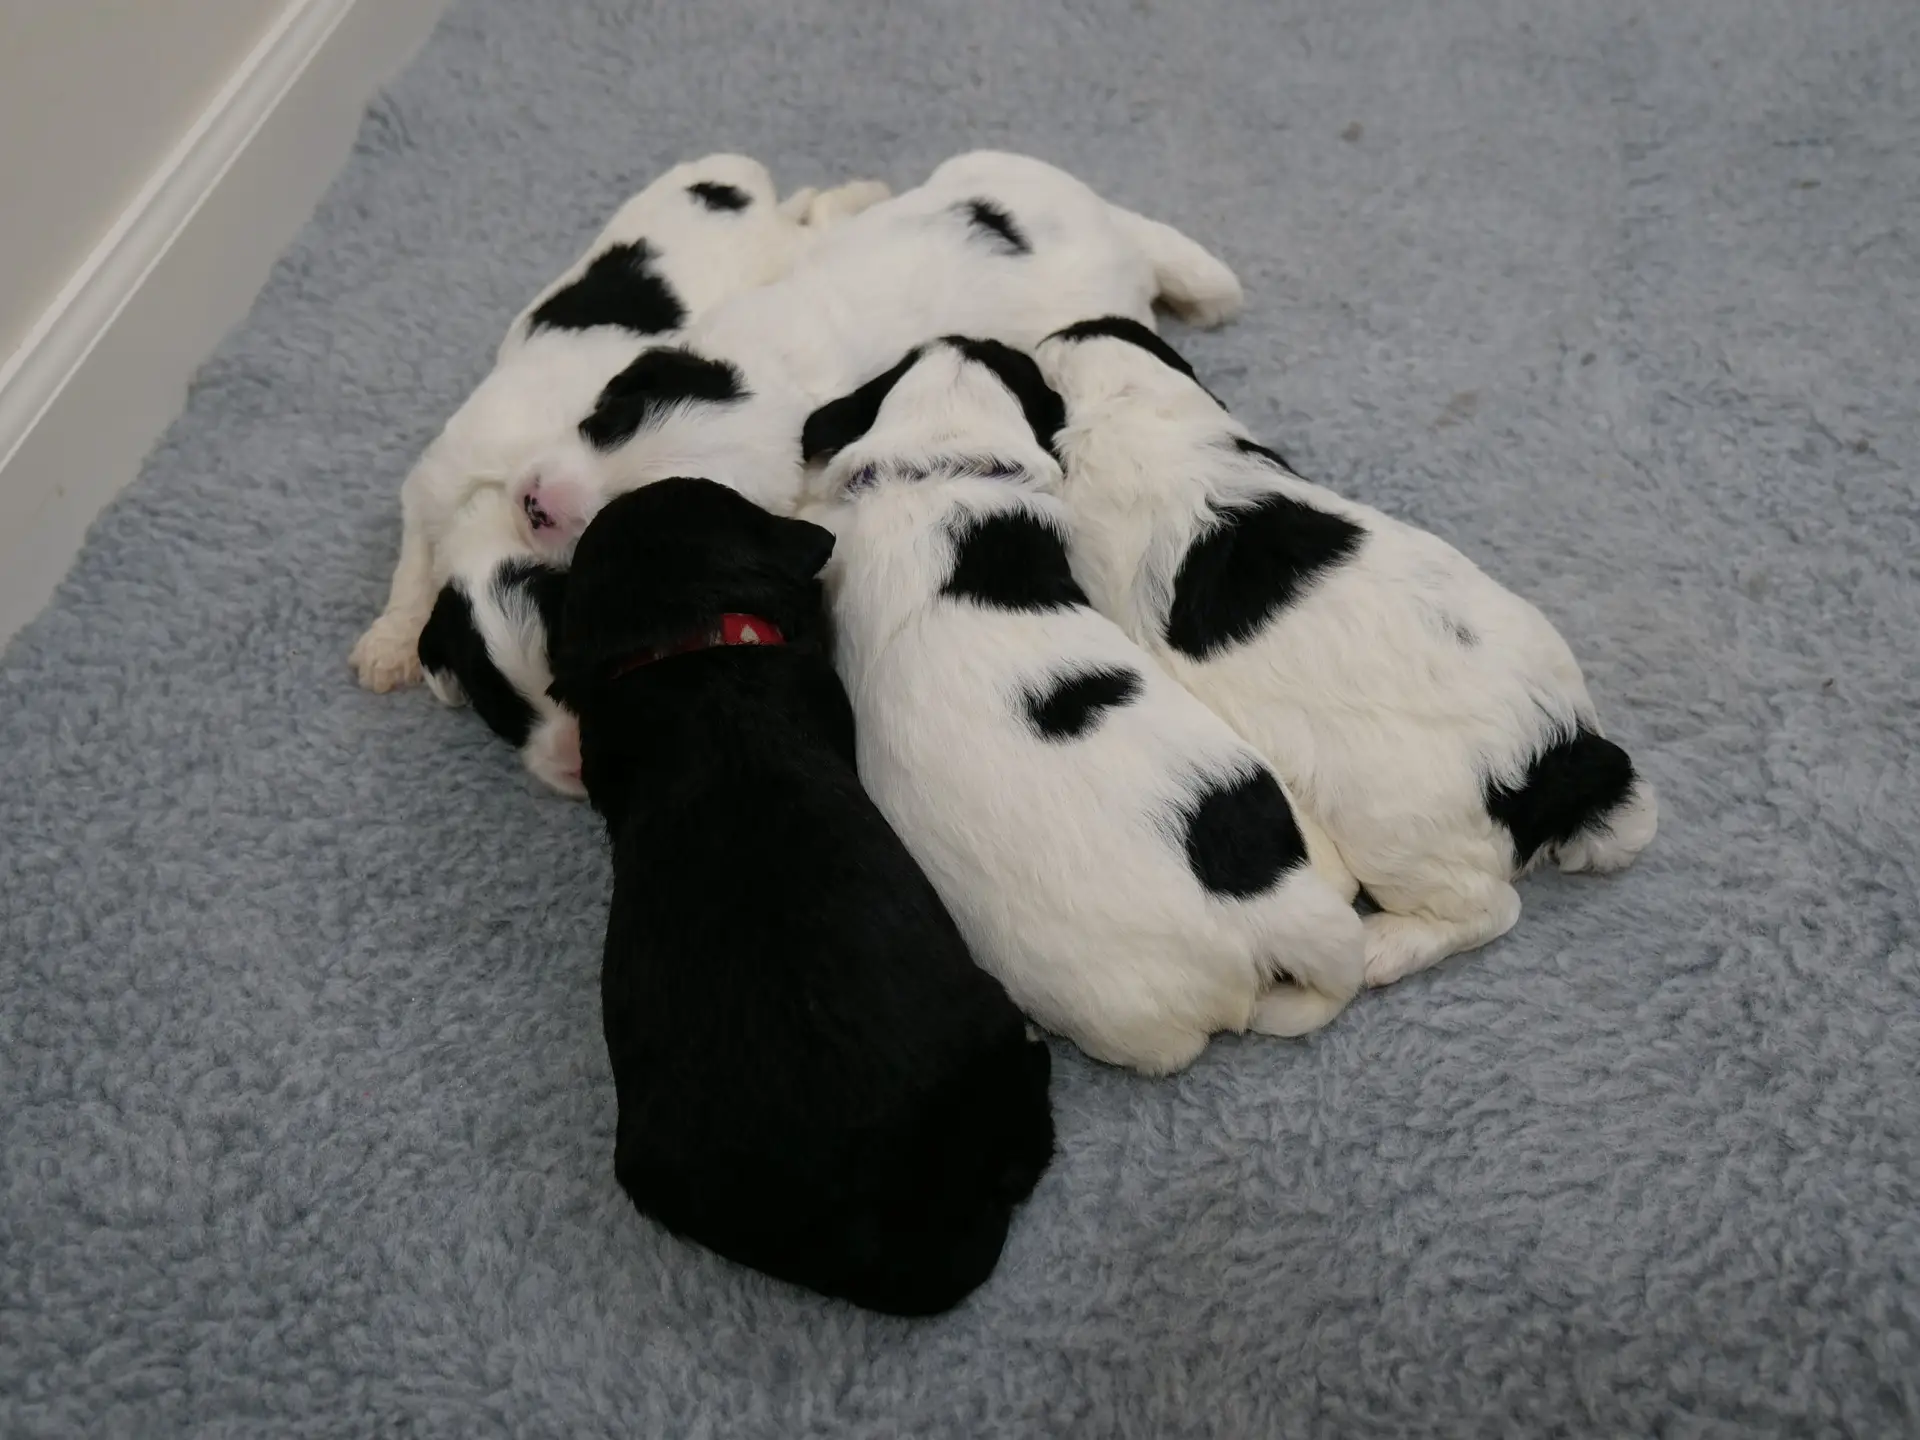 Five 2-week old labradoodle puppies sleeping in a group. 4 black and white partis and 1 solid black.